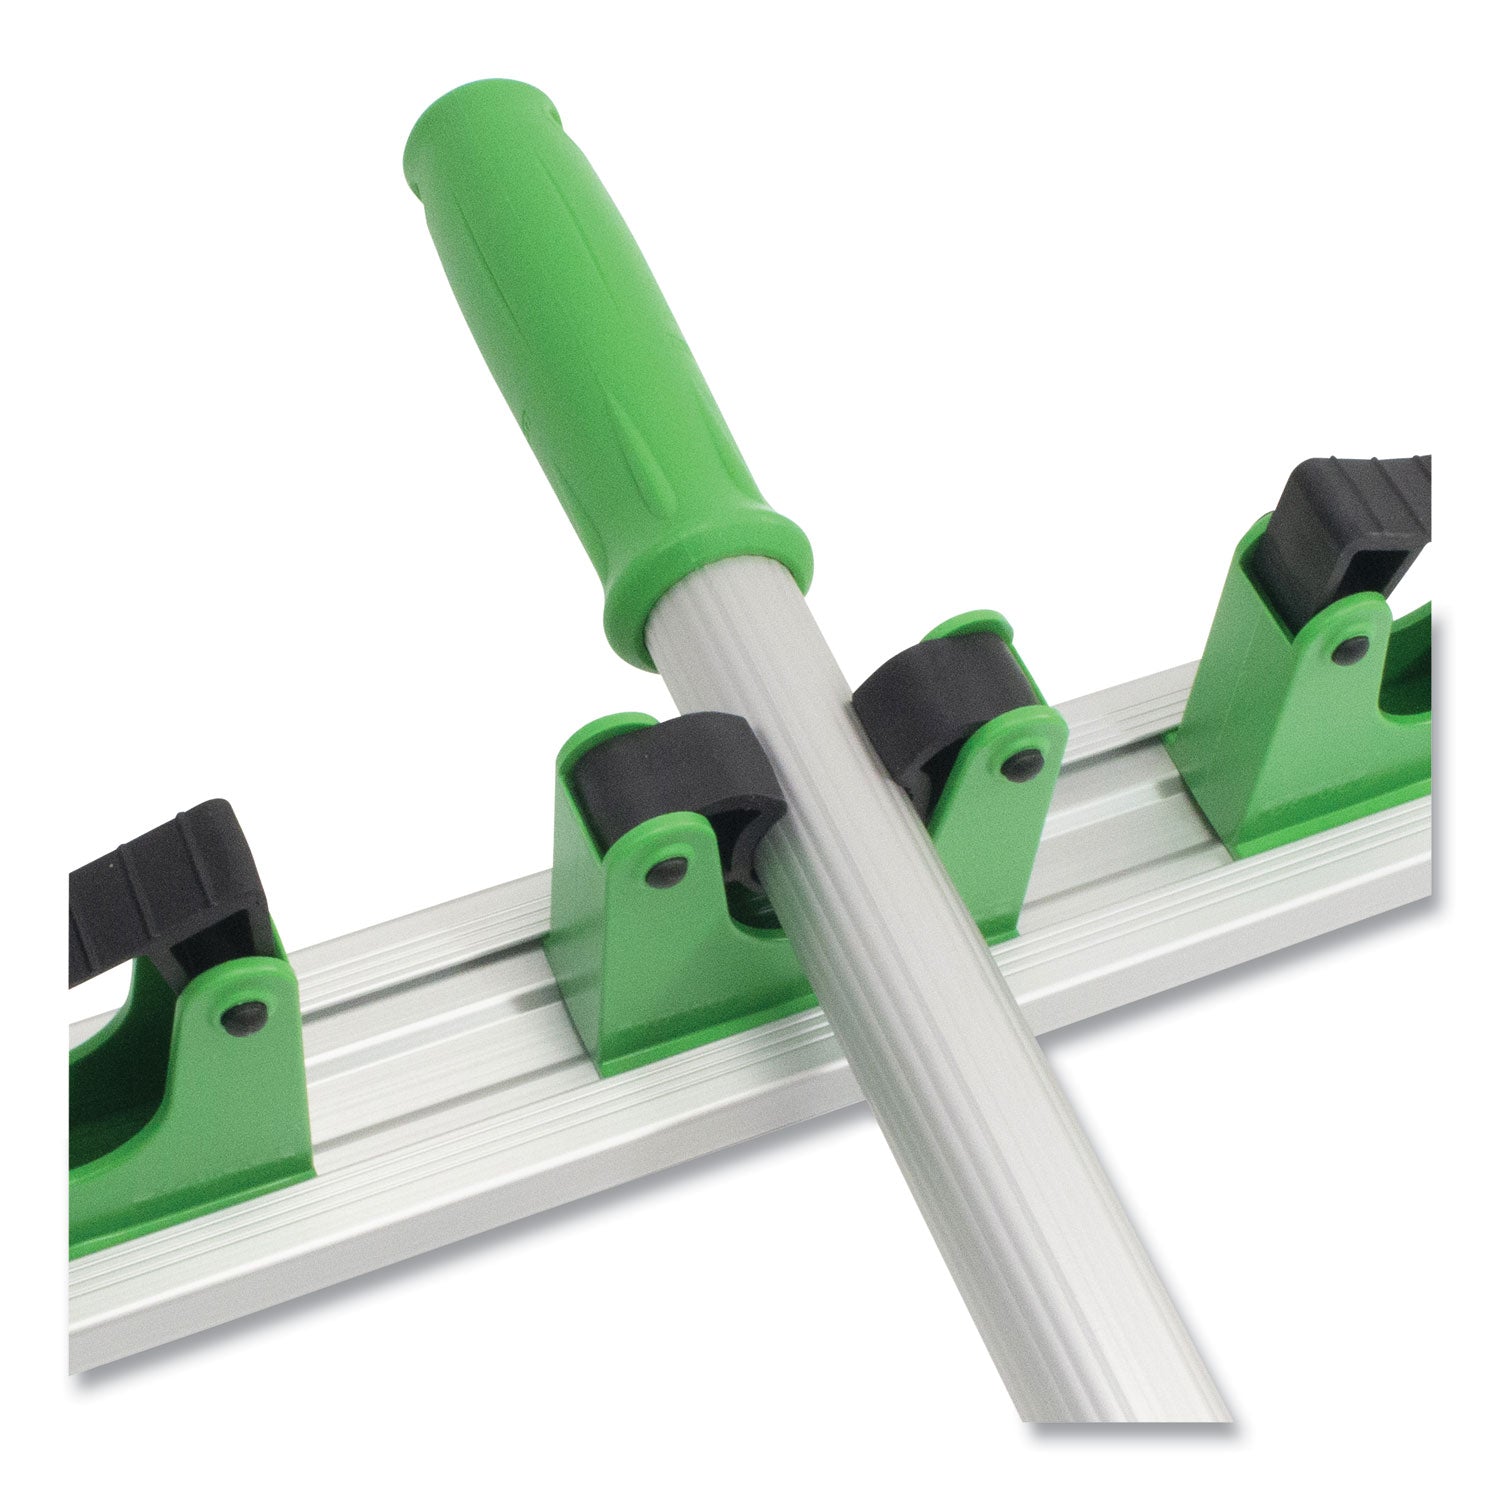 hang-up-cleaning-tool-holder-28w-x-315d-x-217h-silver-green_ungho700ea - 3